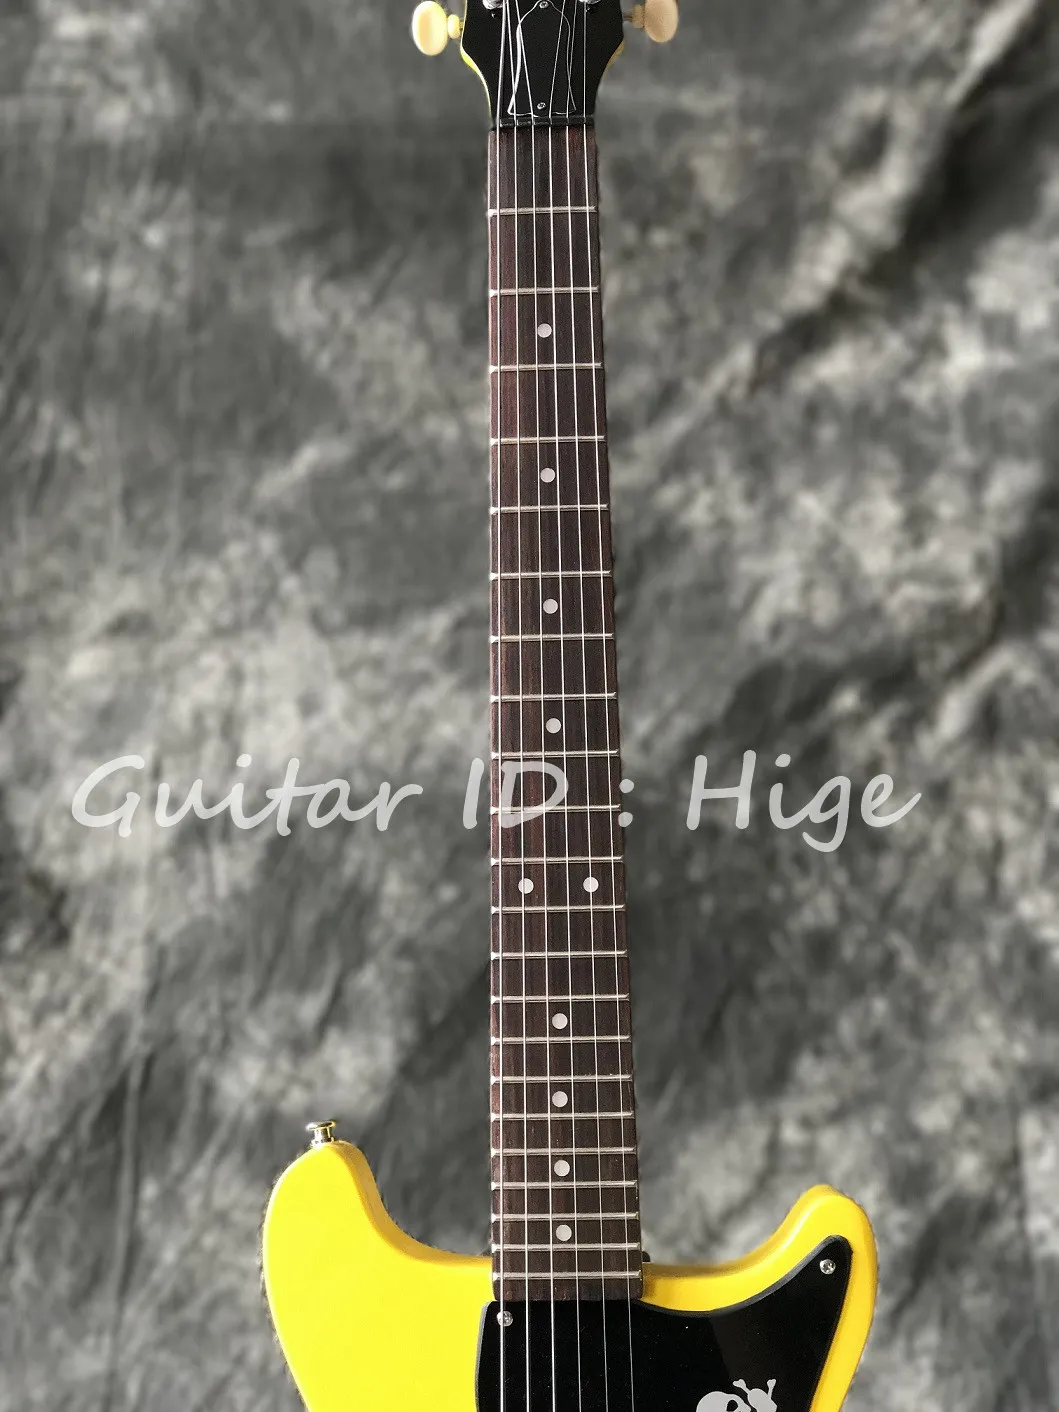 New arrival hot selling studio electric guitar yellow color one piece bridge pickup real guitarra pics showing ,high quality